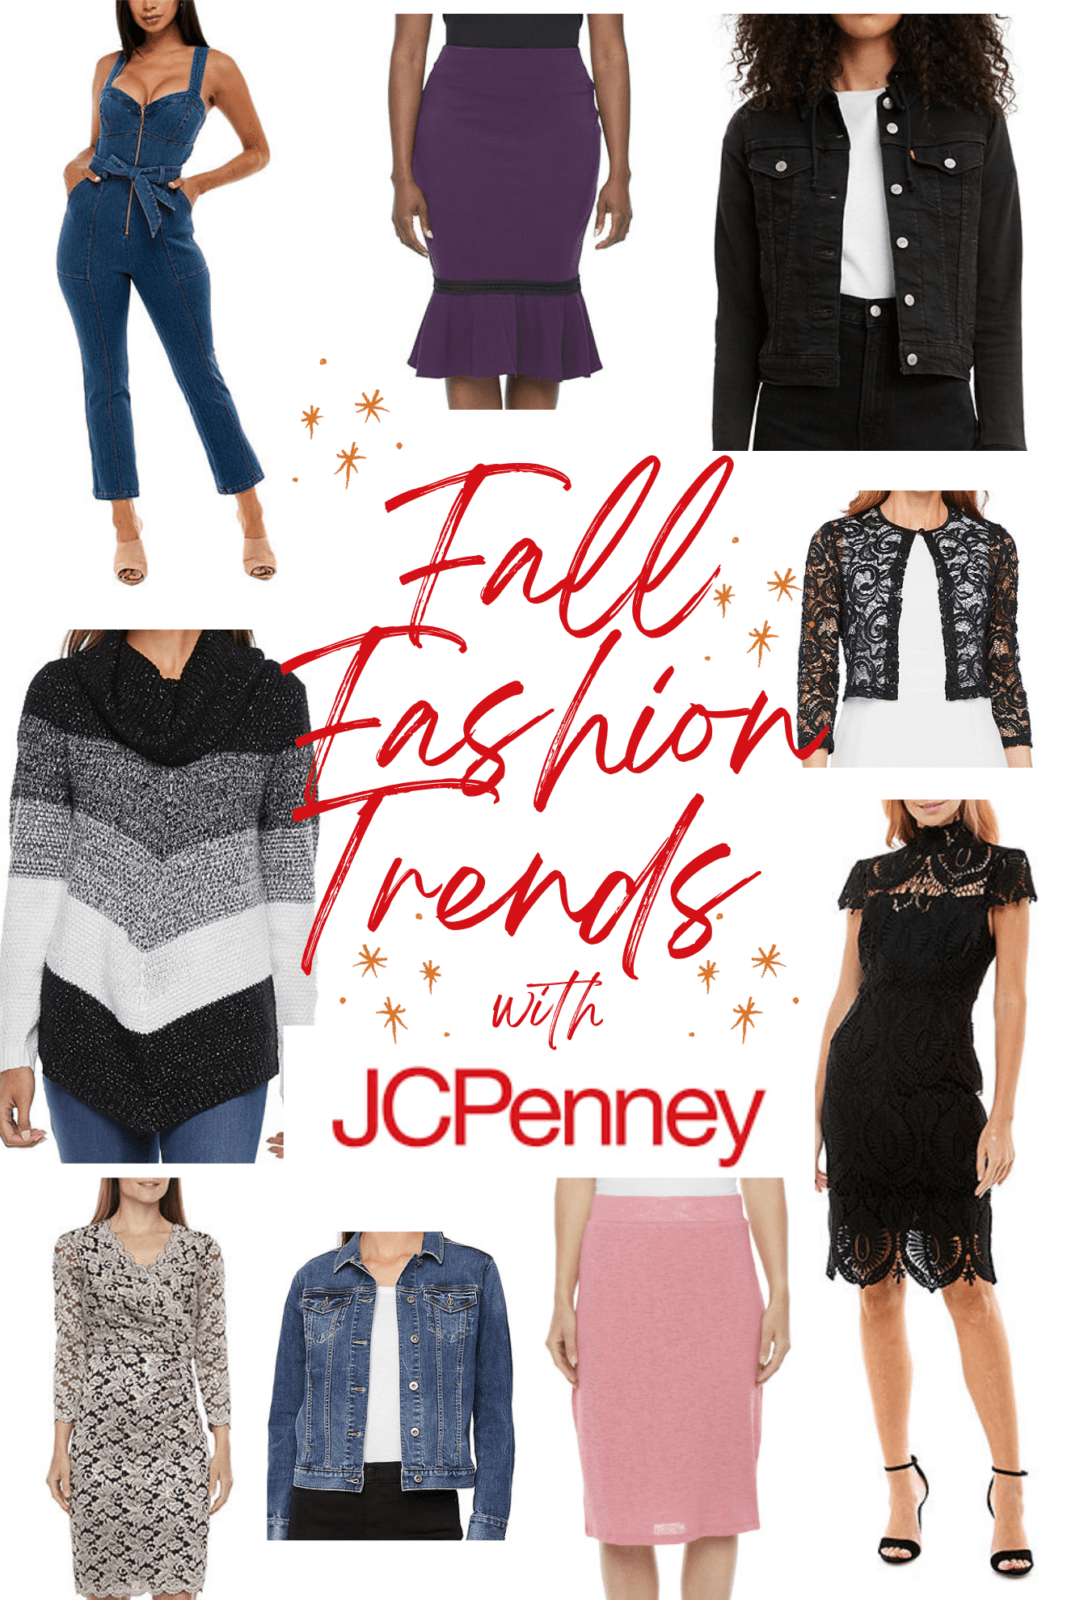 Fall 2021 Fashion Trends with JCPenney by Fashion Blogger Laura Lily, Best Fashion Trends of 2021